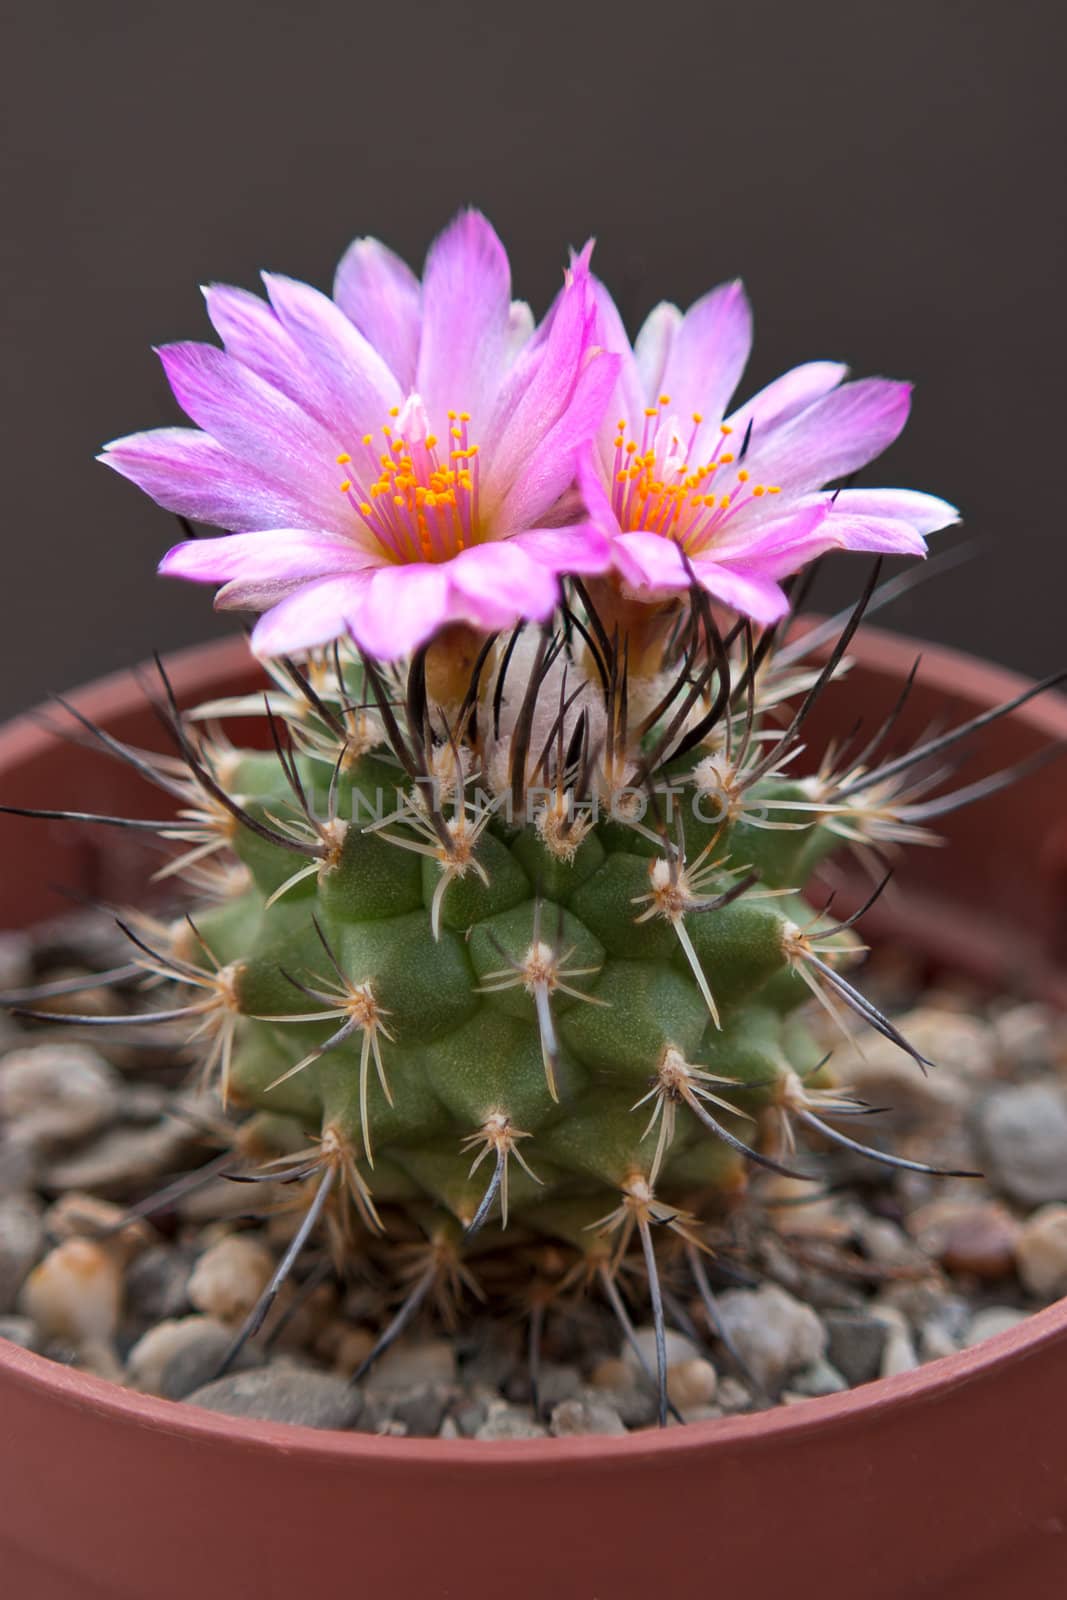 Cactus with blossoms on dark background (Turbinicarpus).Image with shallow depth of field.